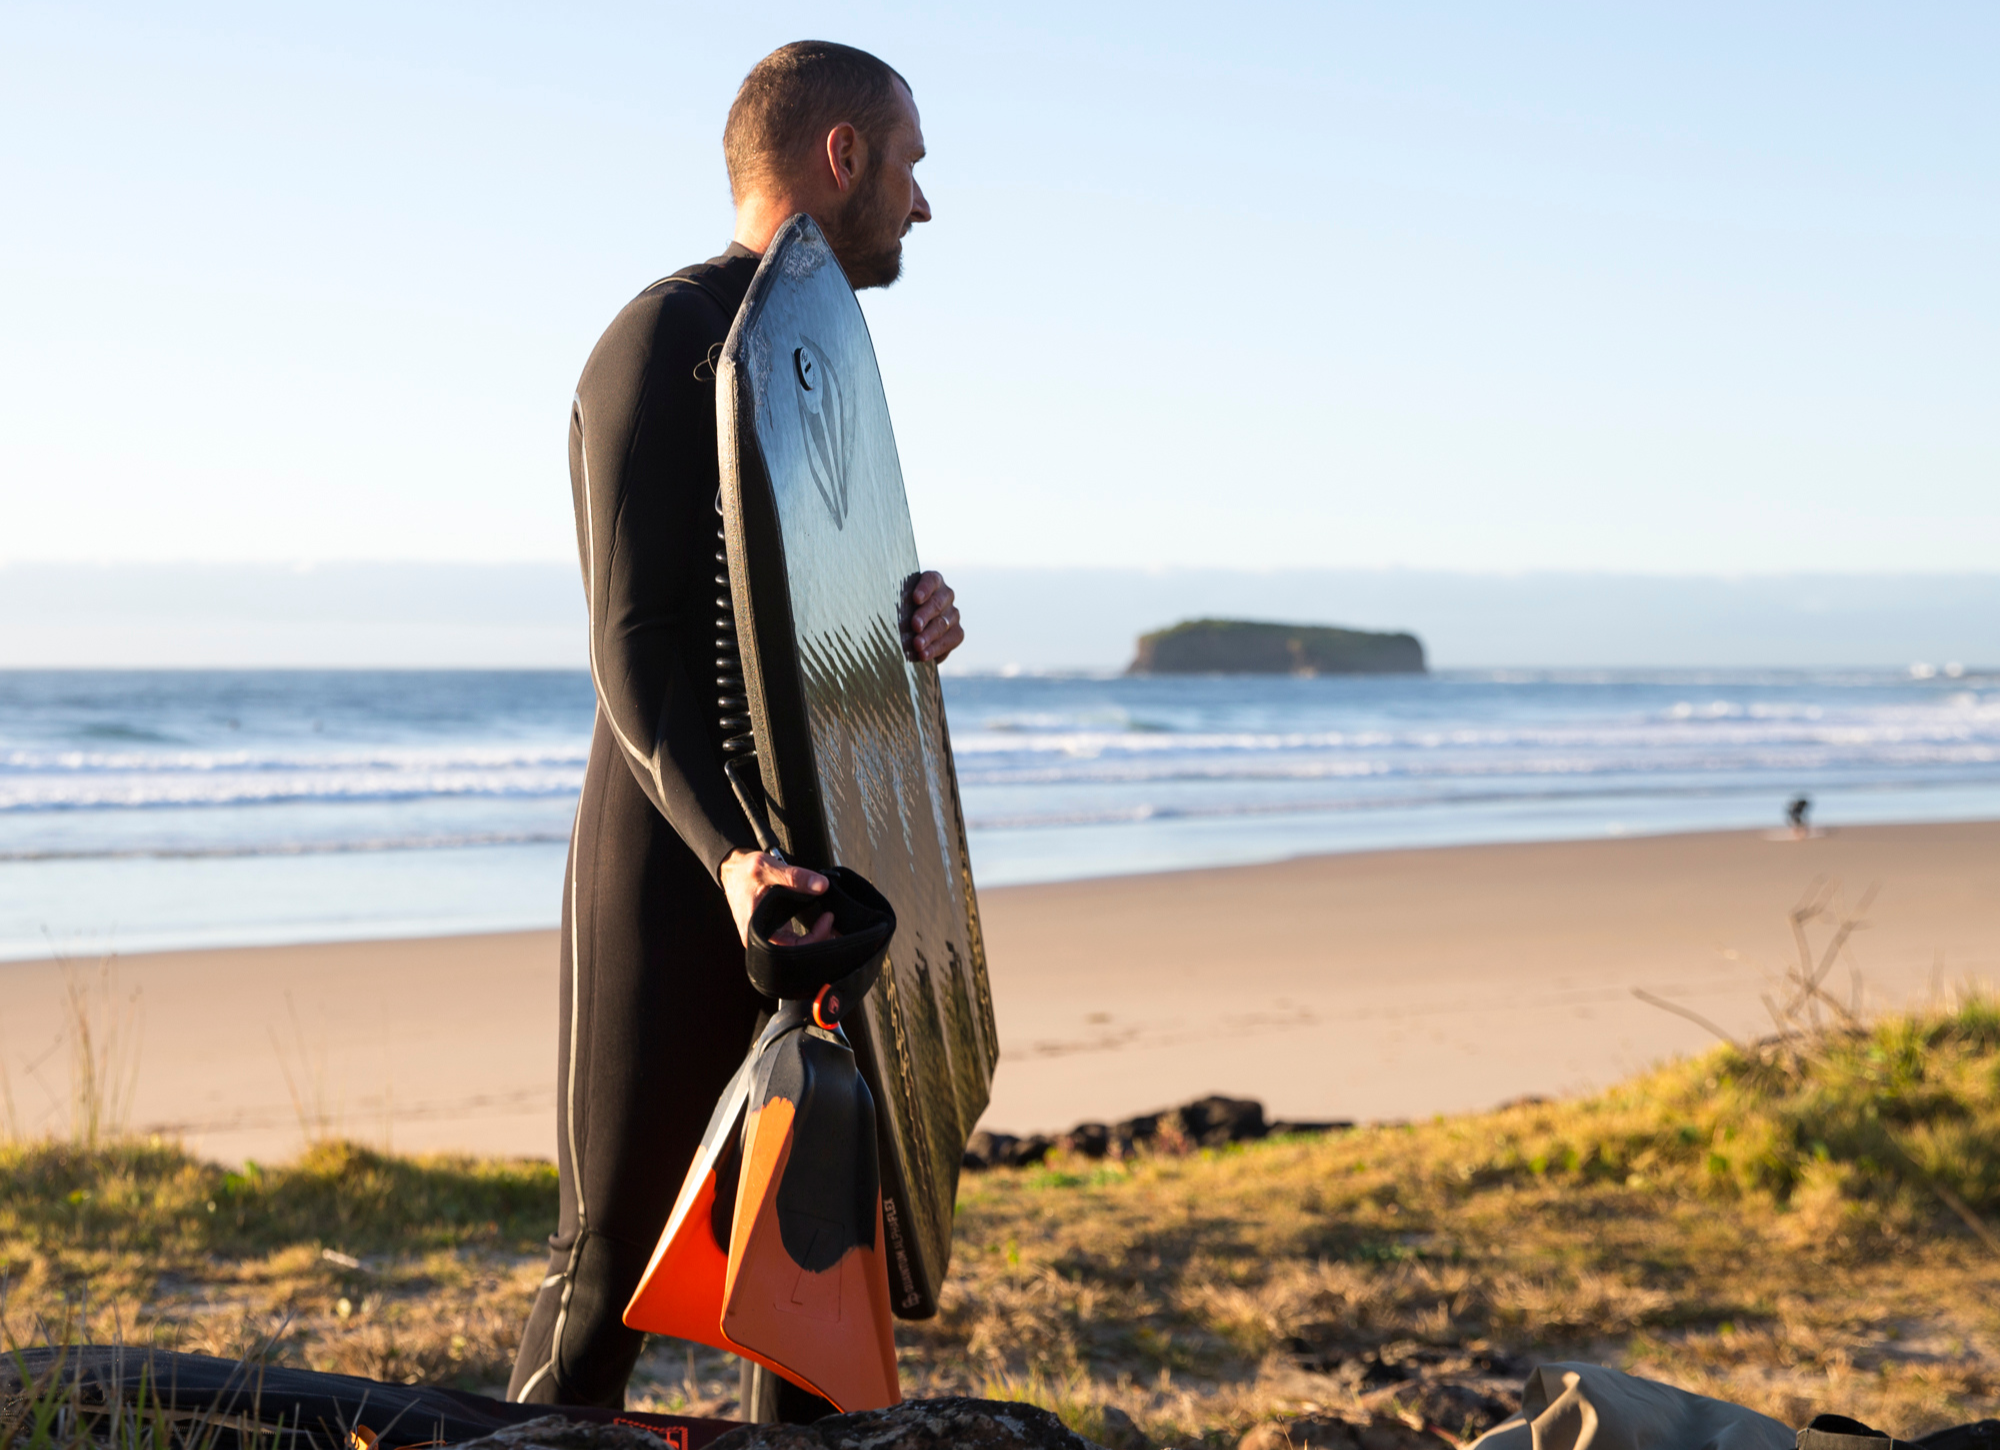 A bodyboarder holds swim fins and a board while looking out at waves.